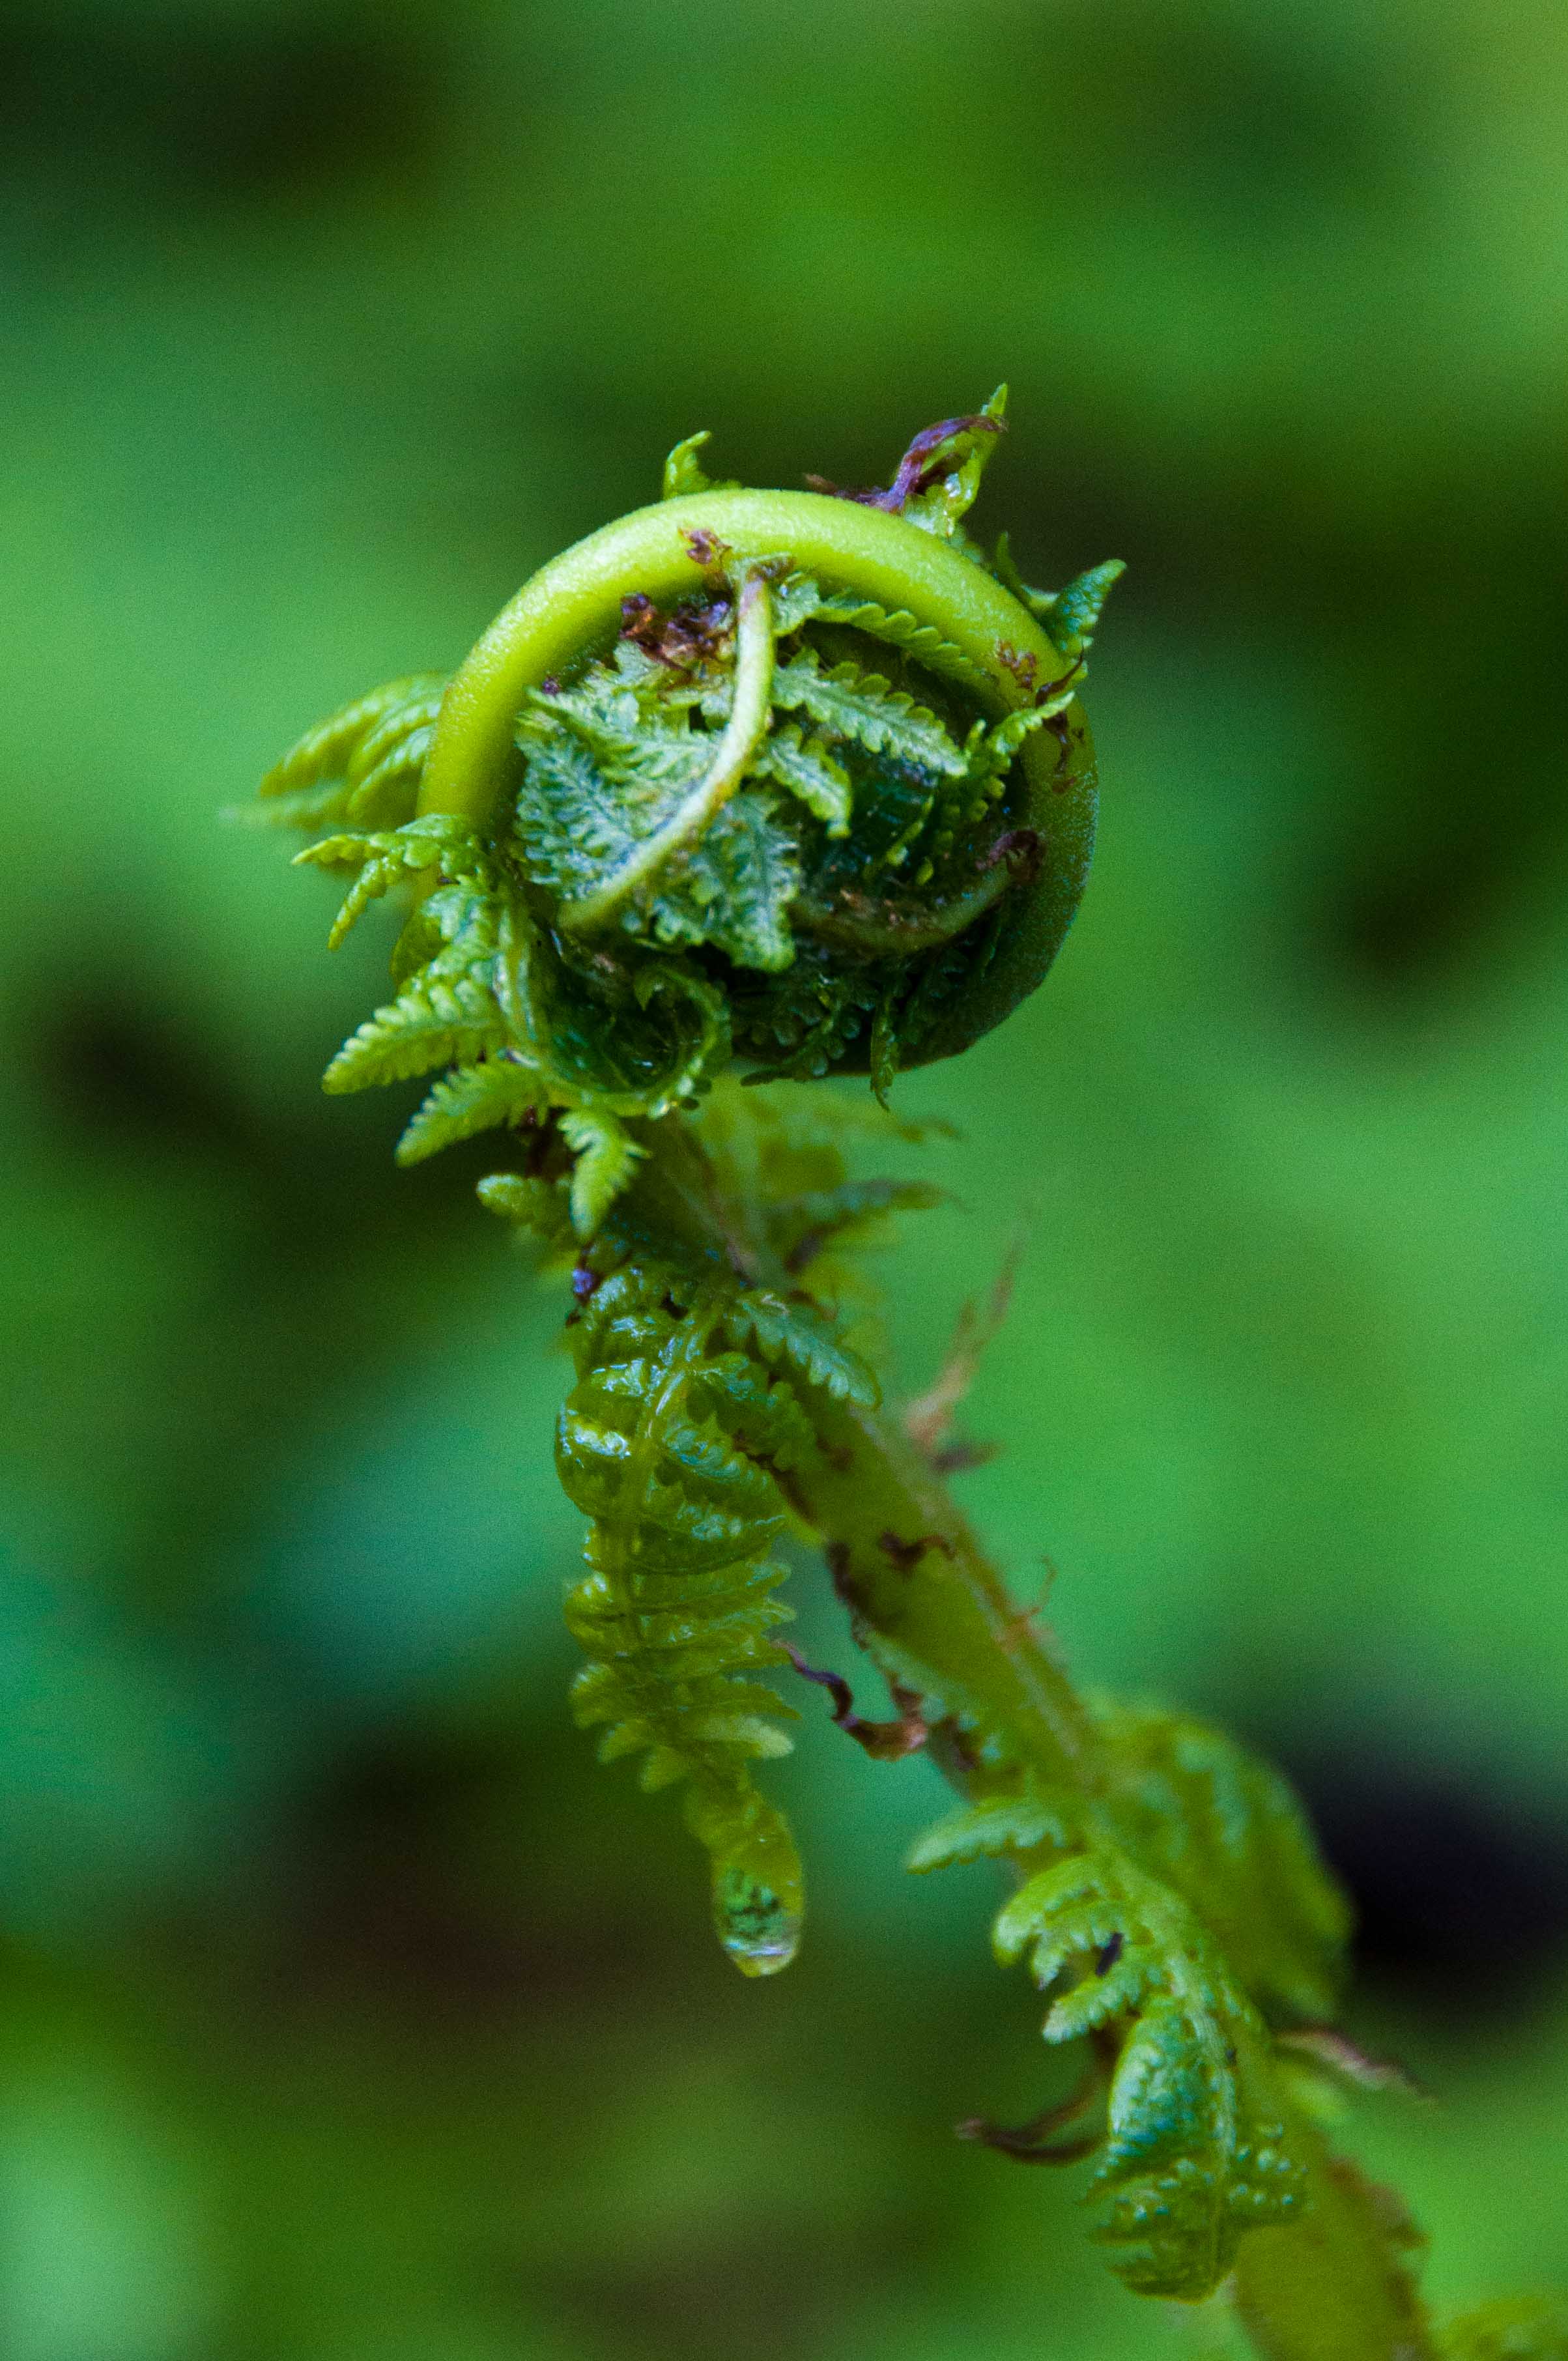 A close up of a green fern plant.